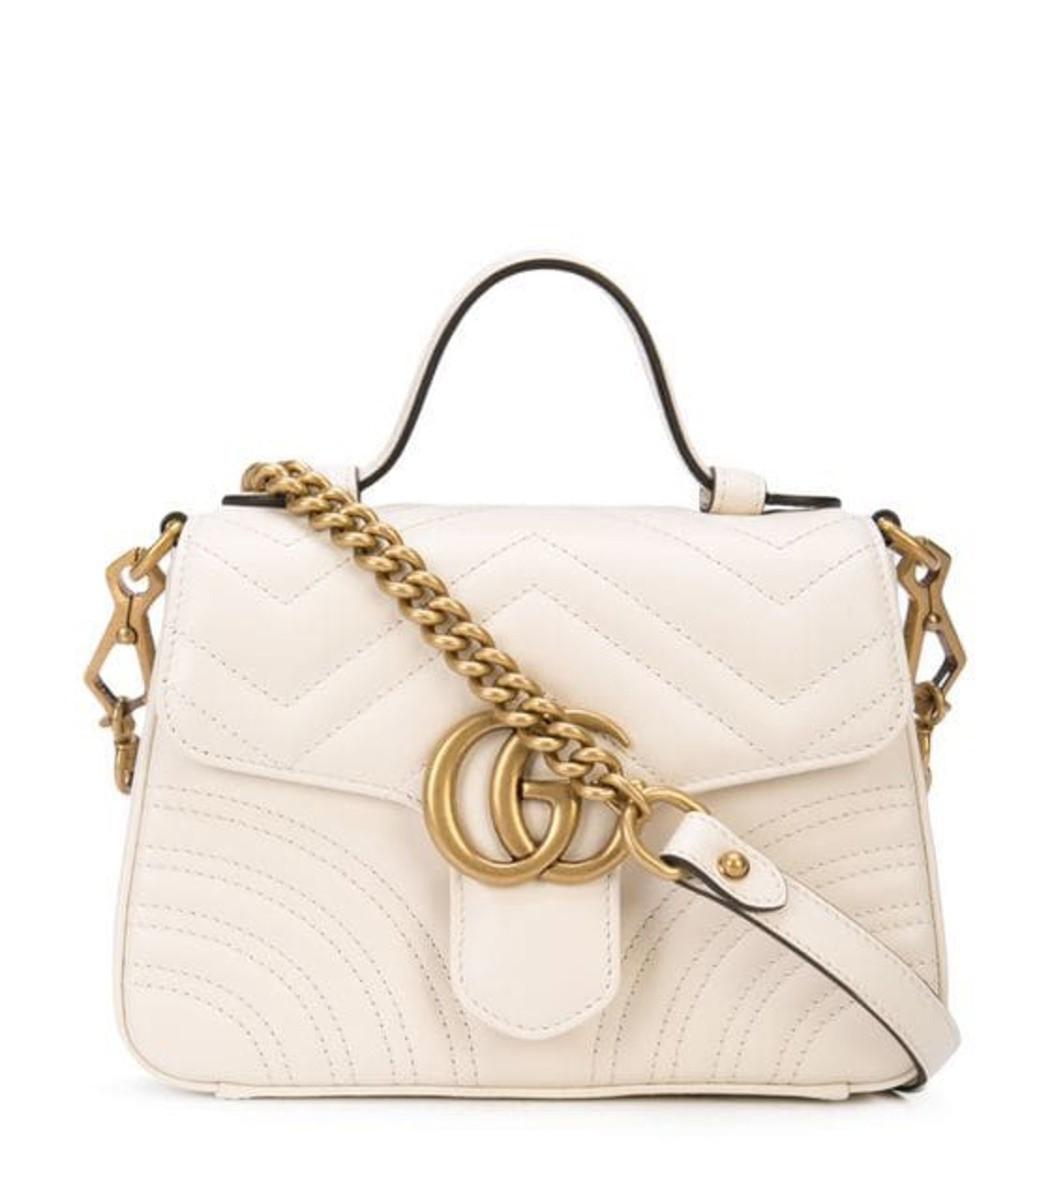 Gucci Marmont 2.0 Mini Top Handle Shoulder Bag in White - Lyst